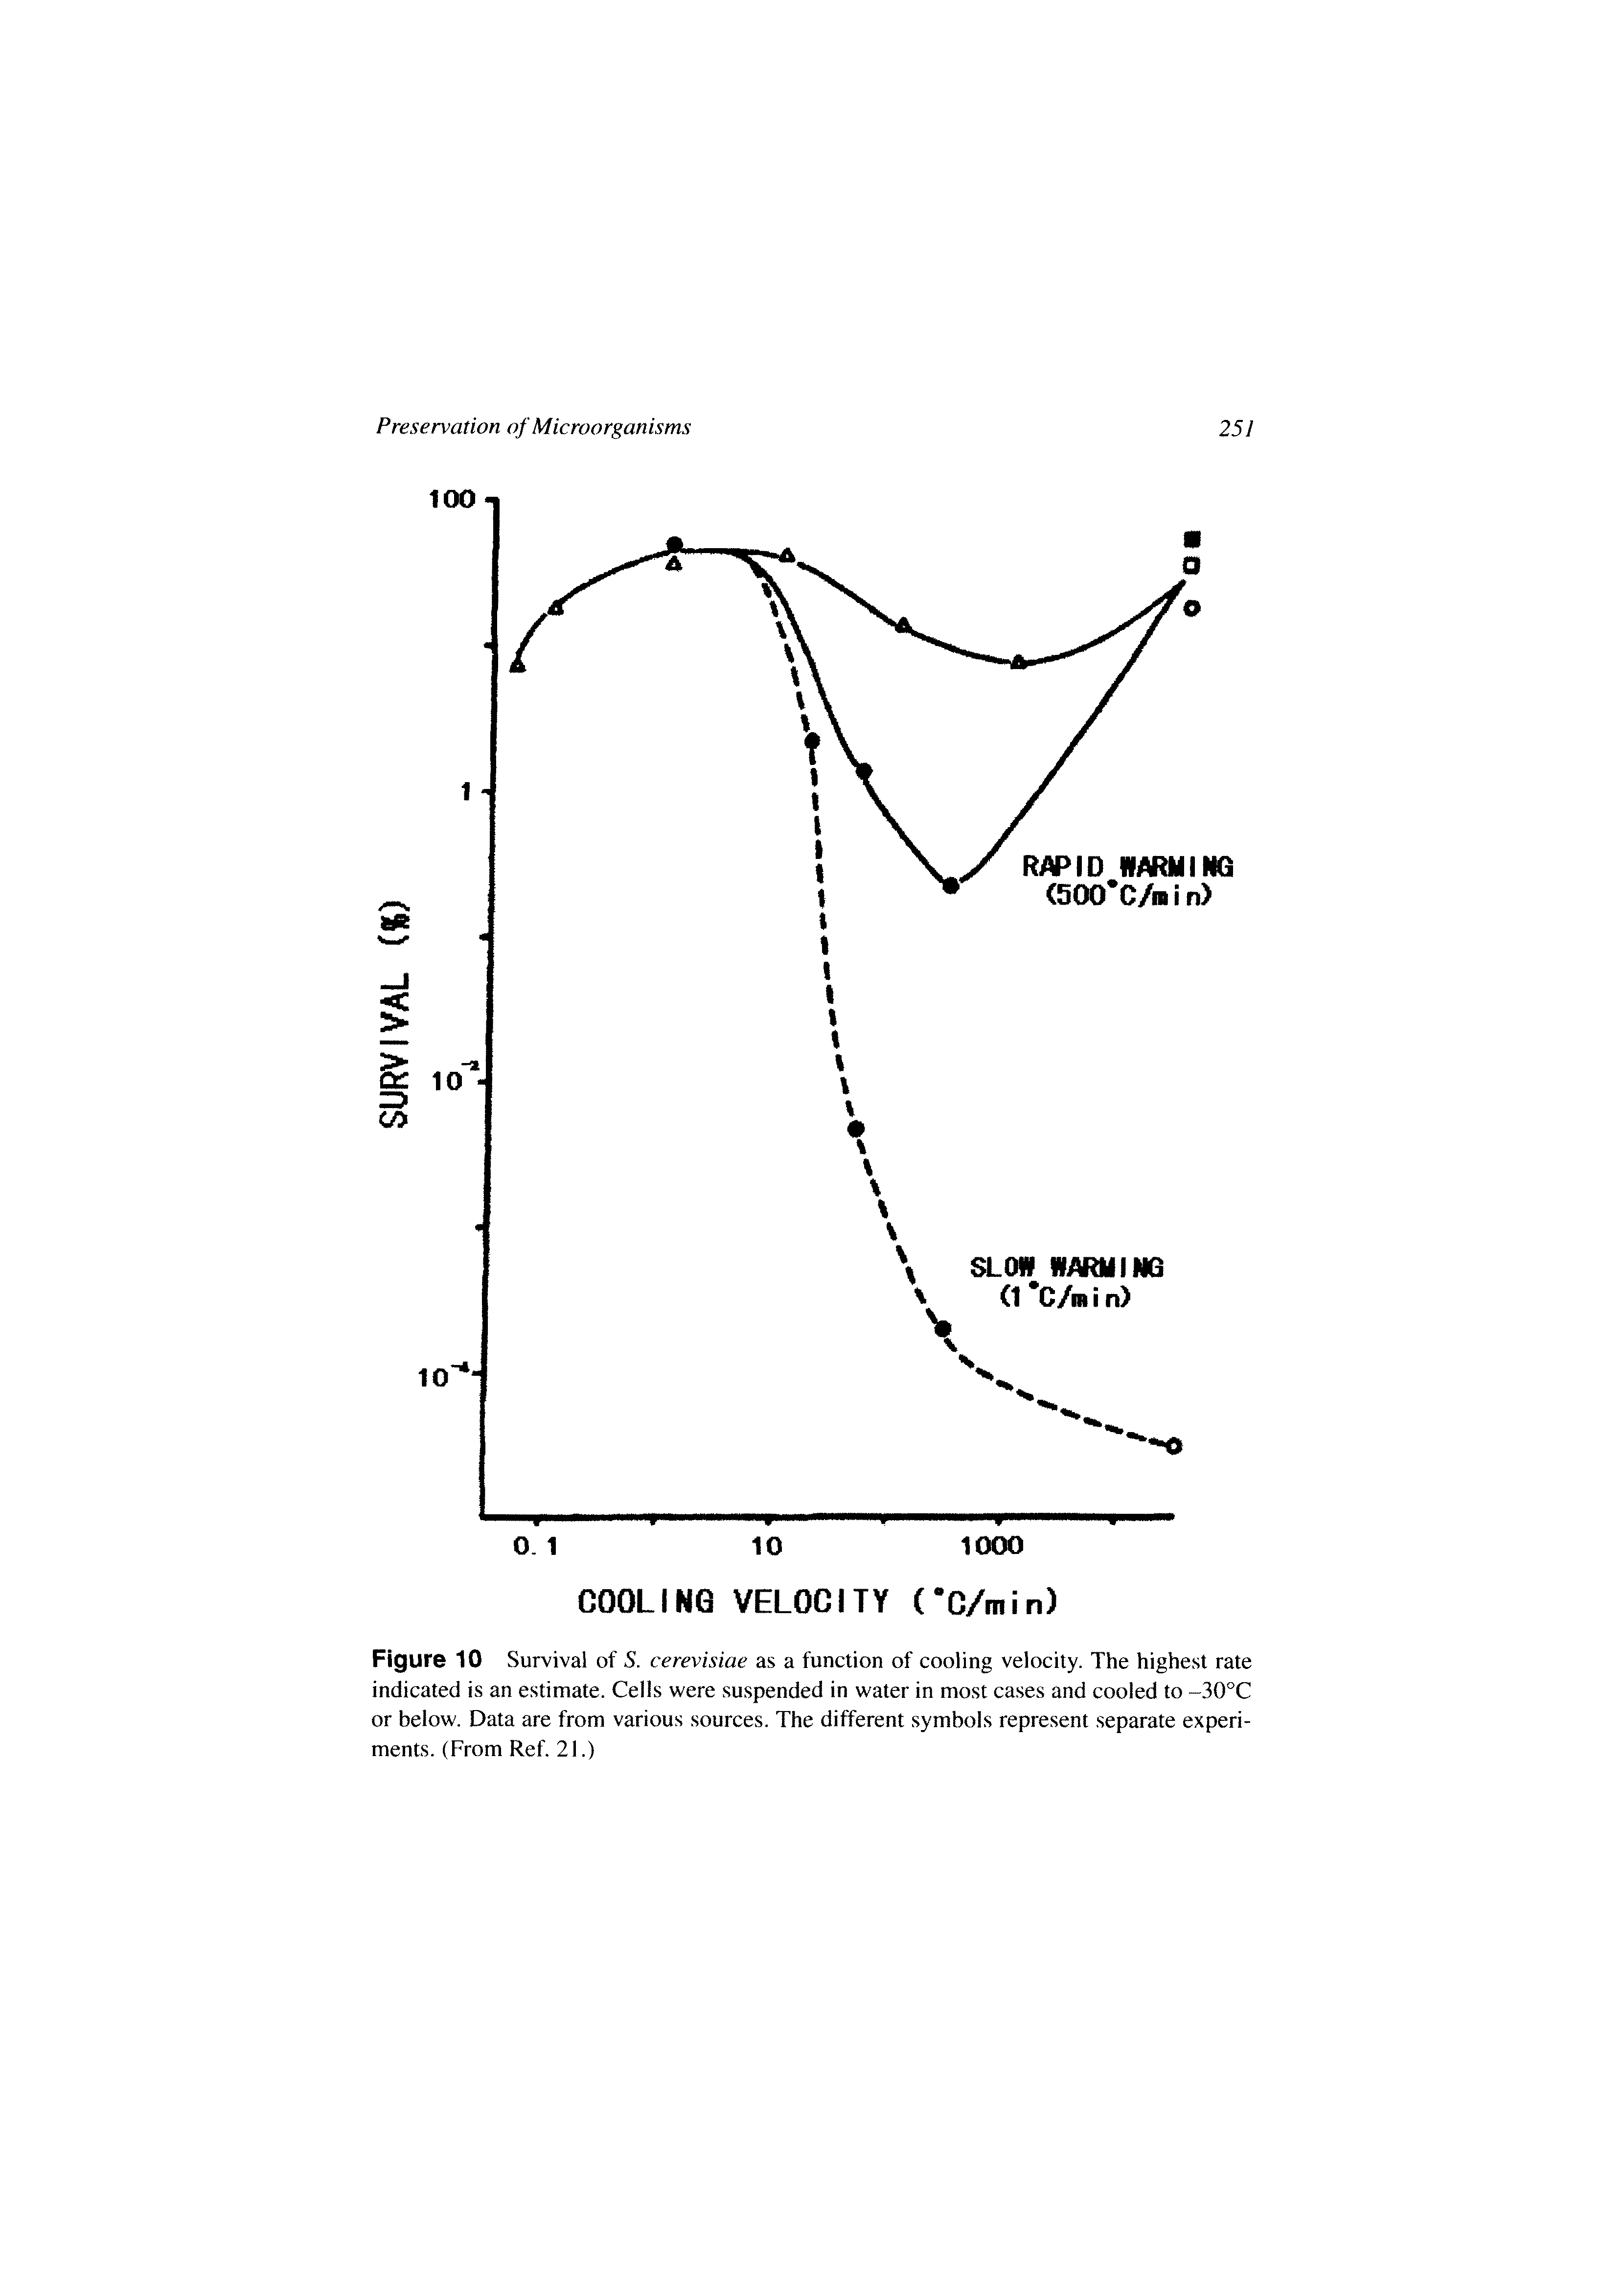 Figure 10 Survival of S. cerevisiae as a function of cooling velocity. The highest rate indicated is an estimate. Cells were suspended in water in most cases and cooled to -30°C or below. Data are from various sources. The different symbols represent. separate experiments. (From Ref. 21.)...